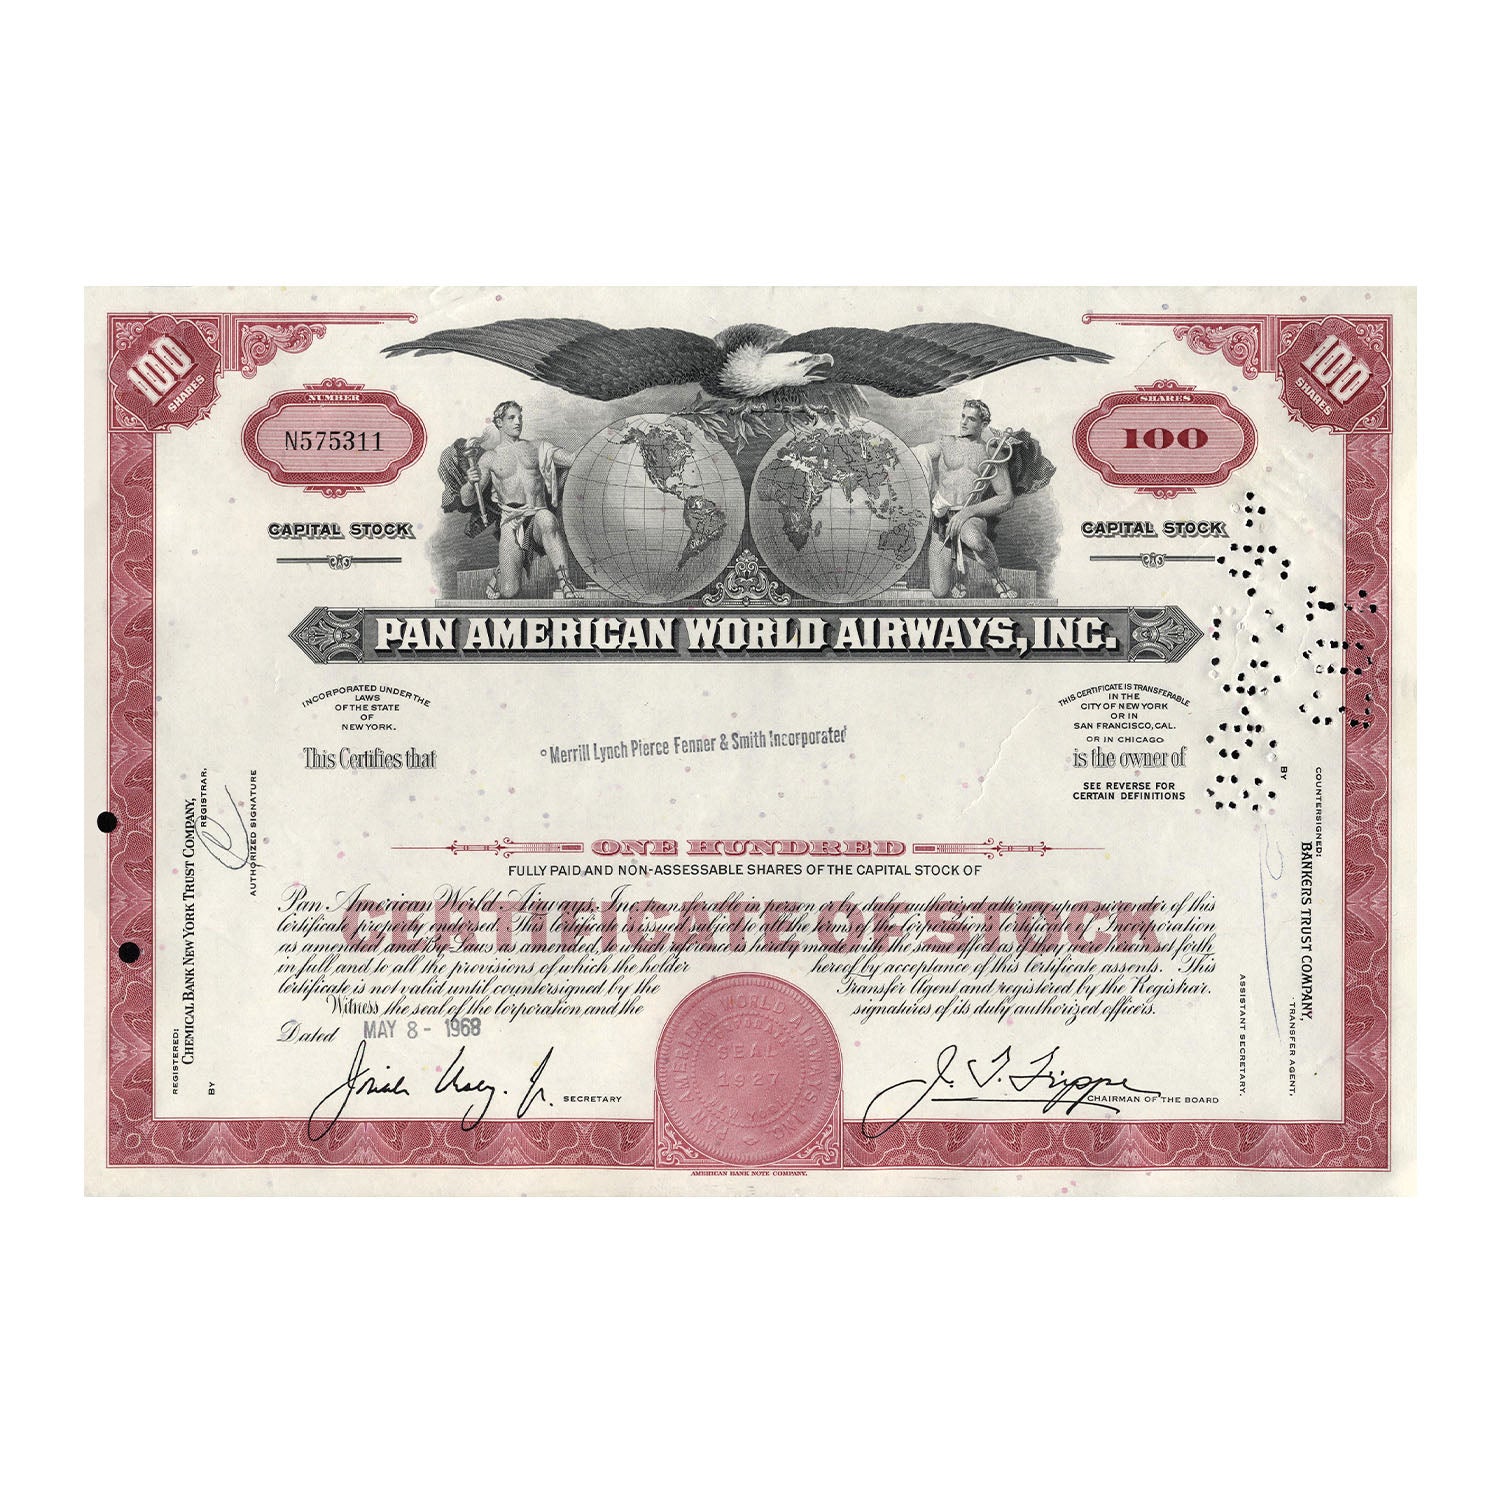 Share Certificate of the First Worldwide Flying Airline